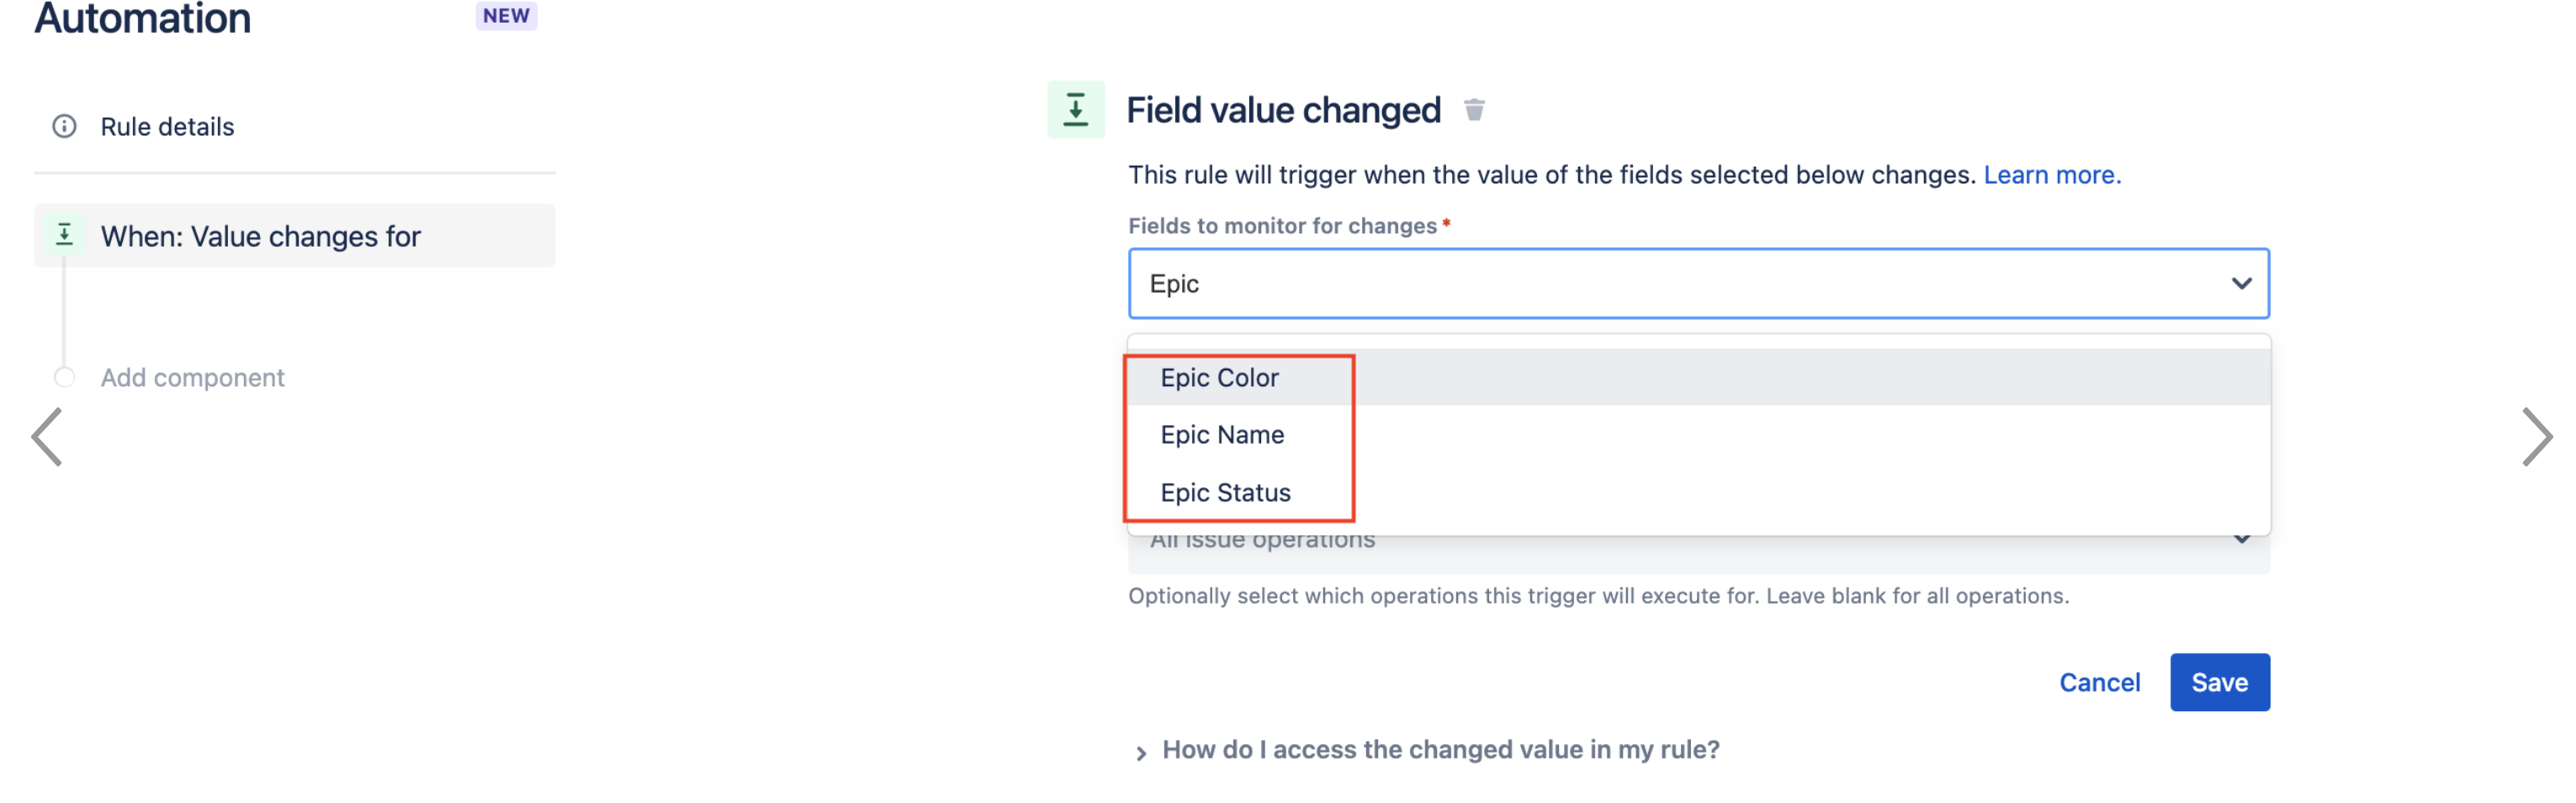 "Field Value Changed" trigger does not have "Epic Link" field present